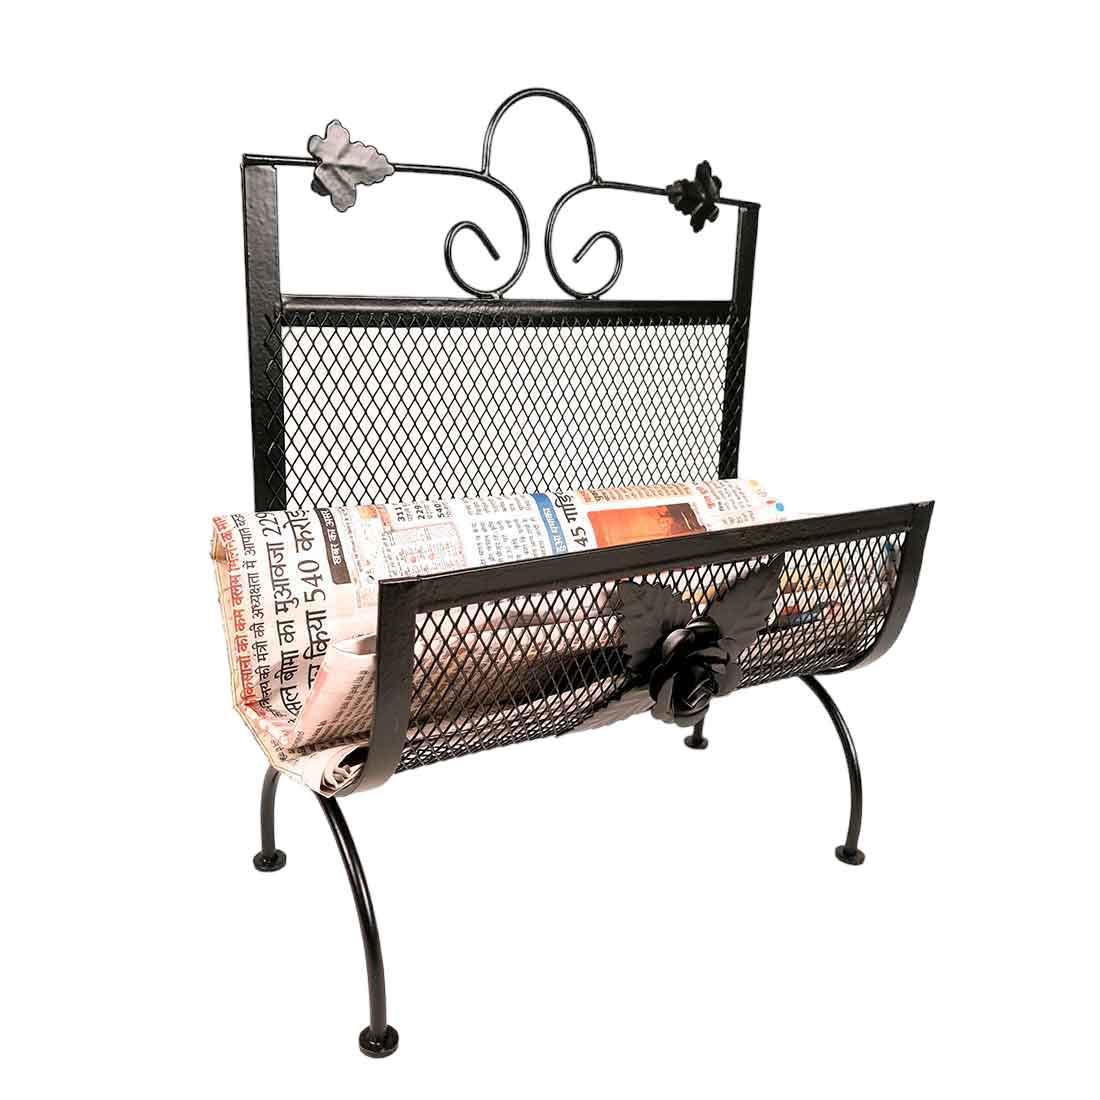 Magazine Holder | Newspaper Stand Cum Organizer - For Home Decor, Living Room, Organising & Gifts - 12 Inch - Apkamart #Style_Pack of 1